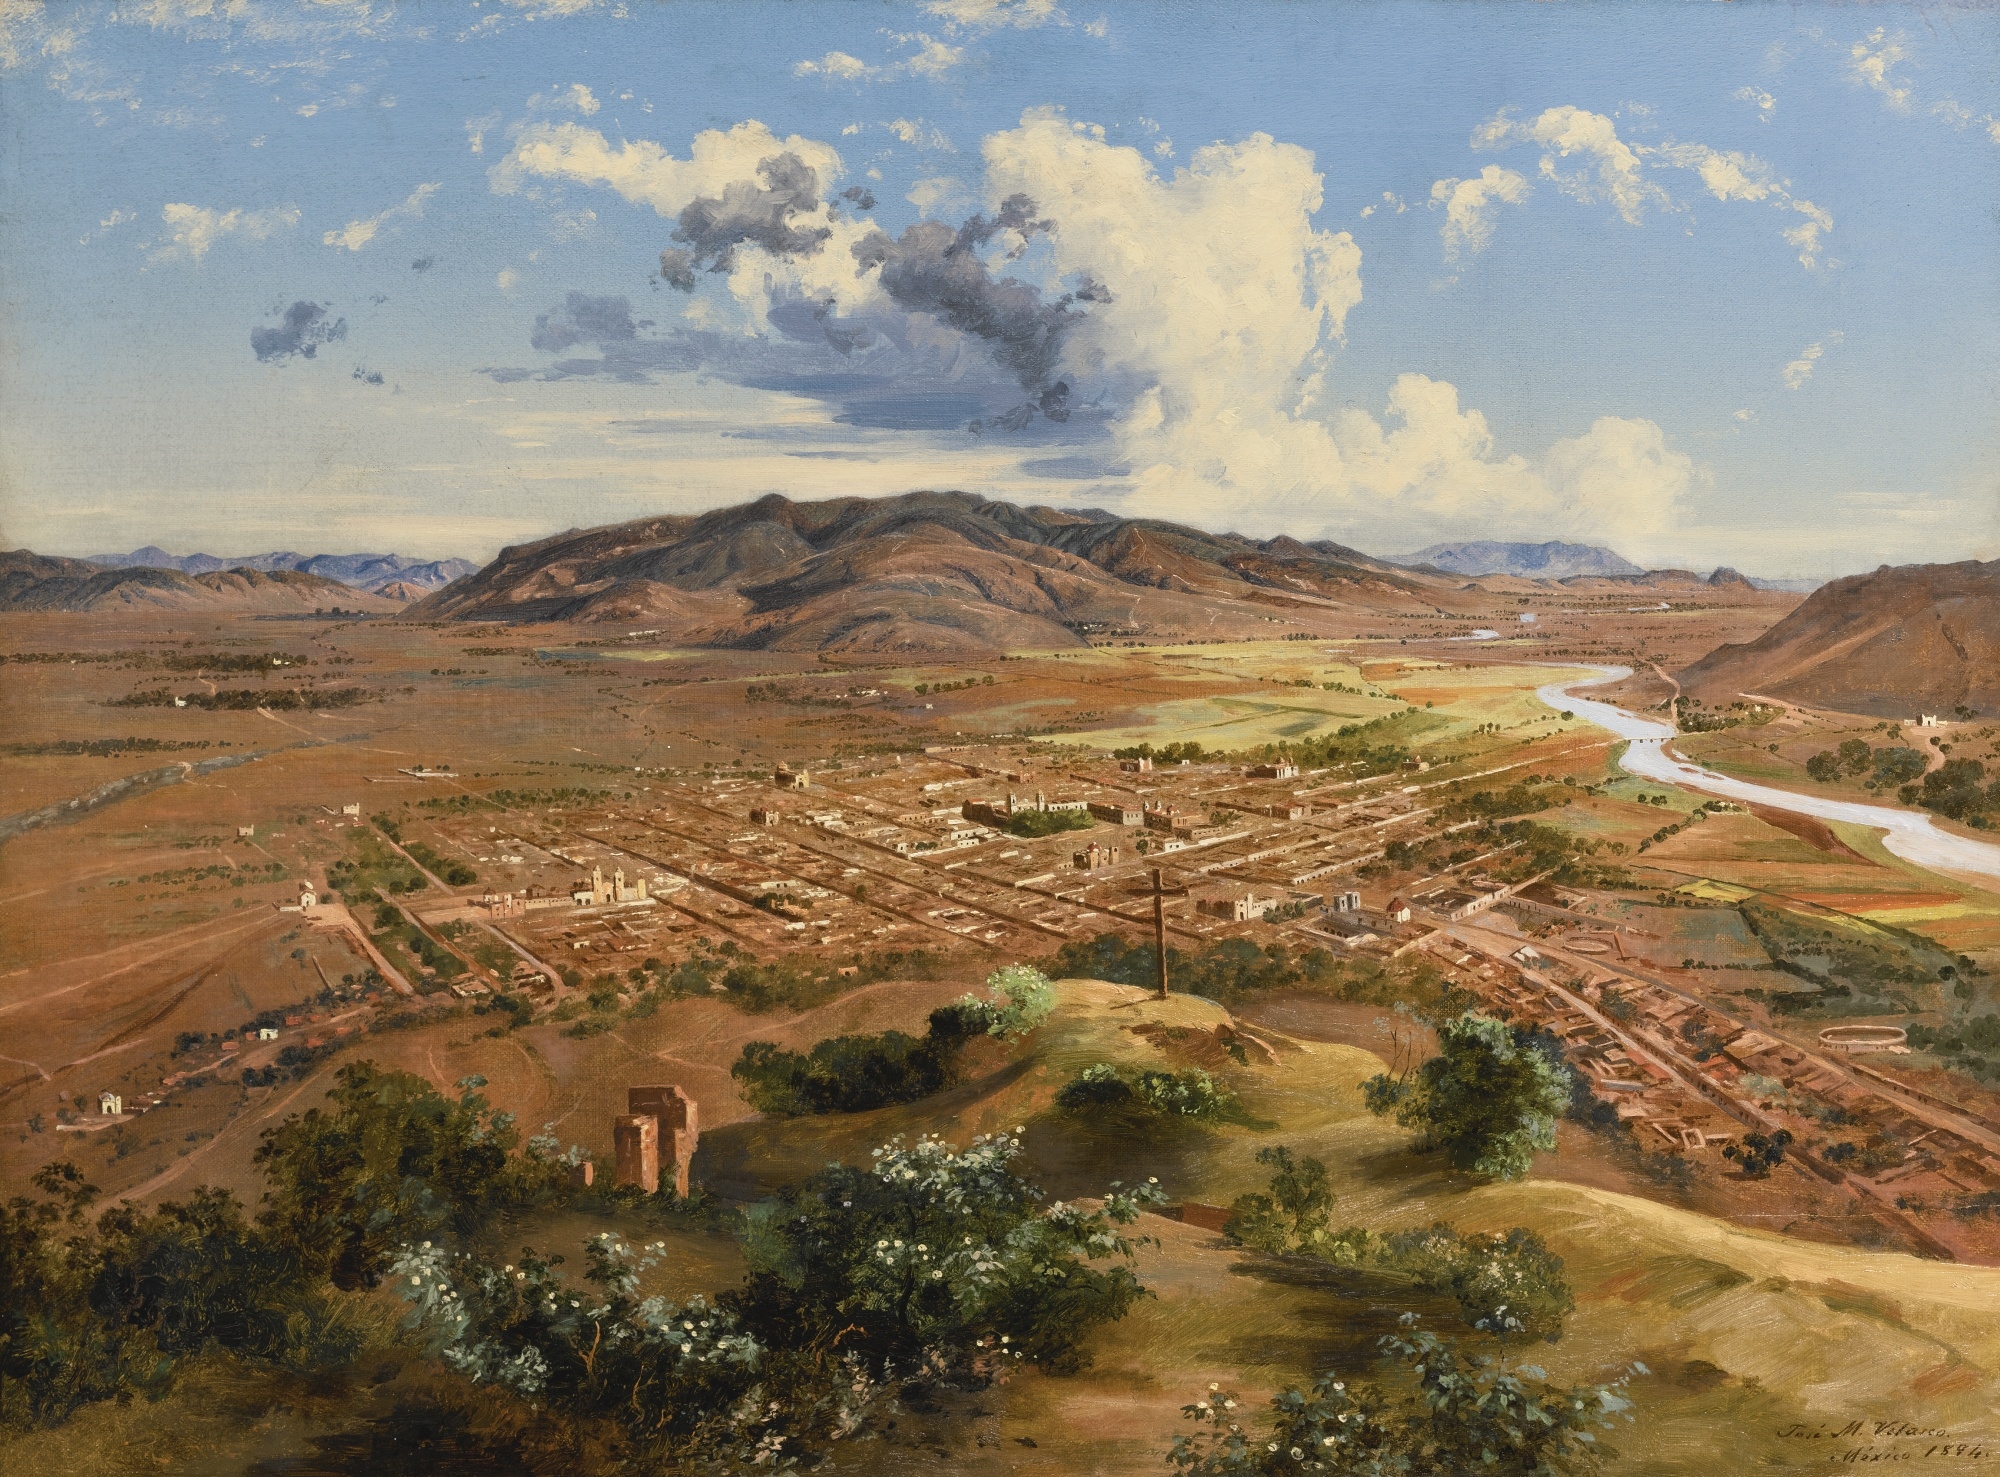 The Valley of Oaxaca by José María Velasco - 1894 - 46 by 64 cm private collection